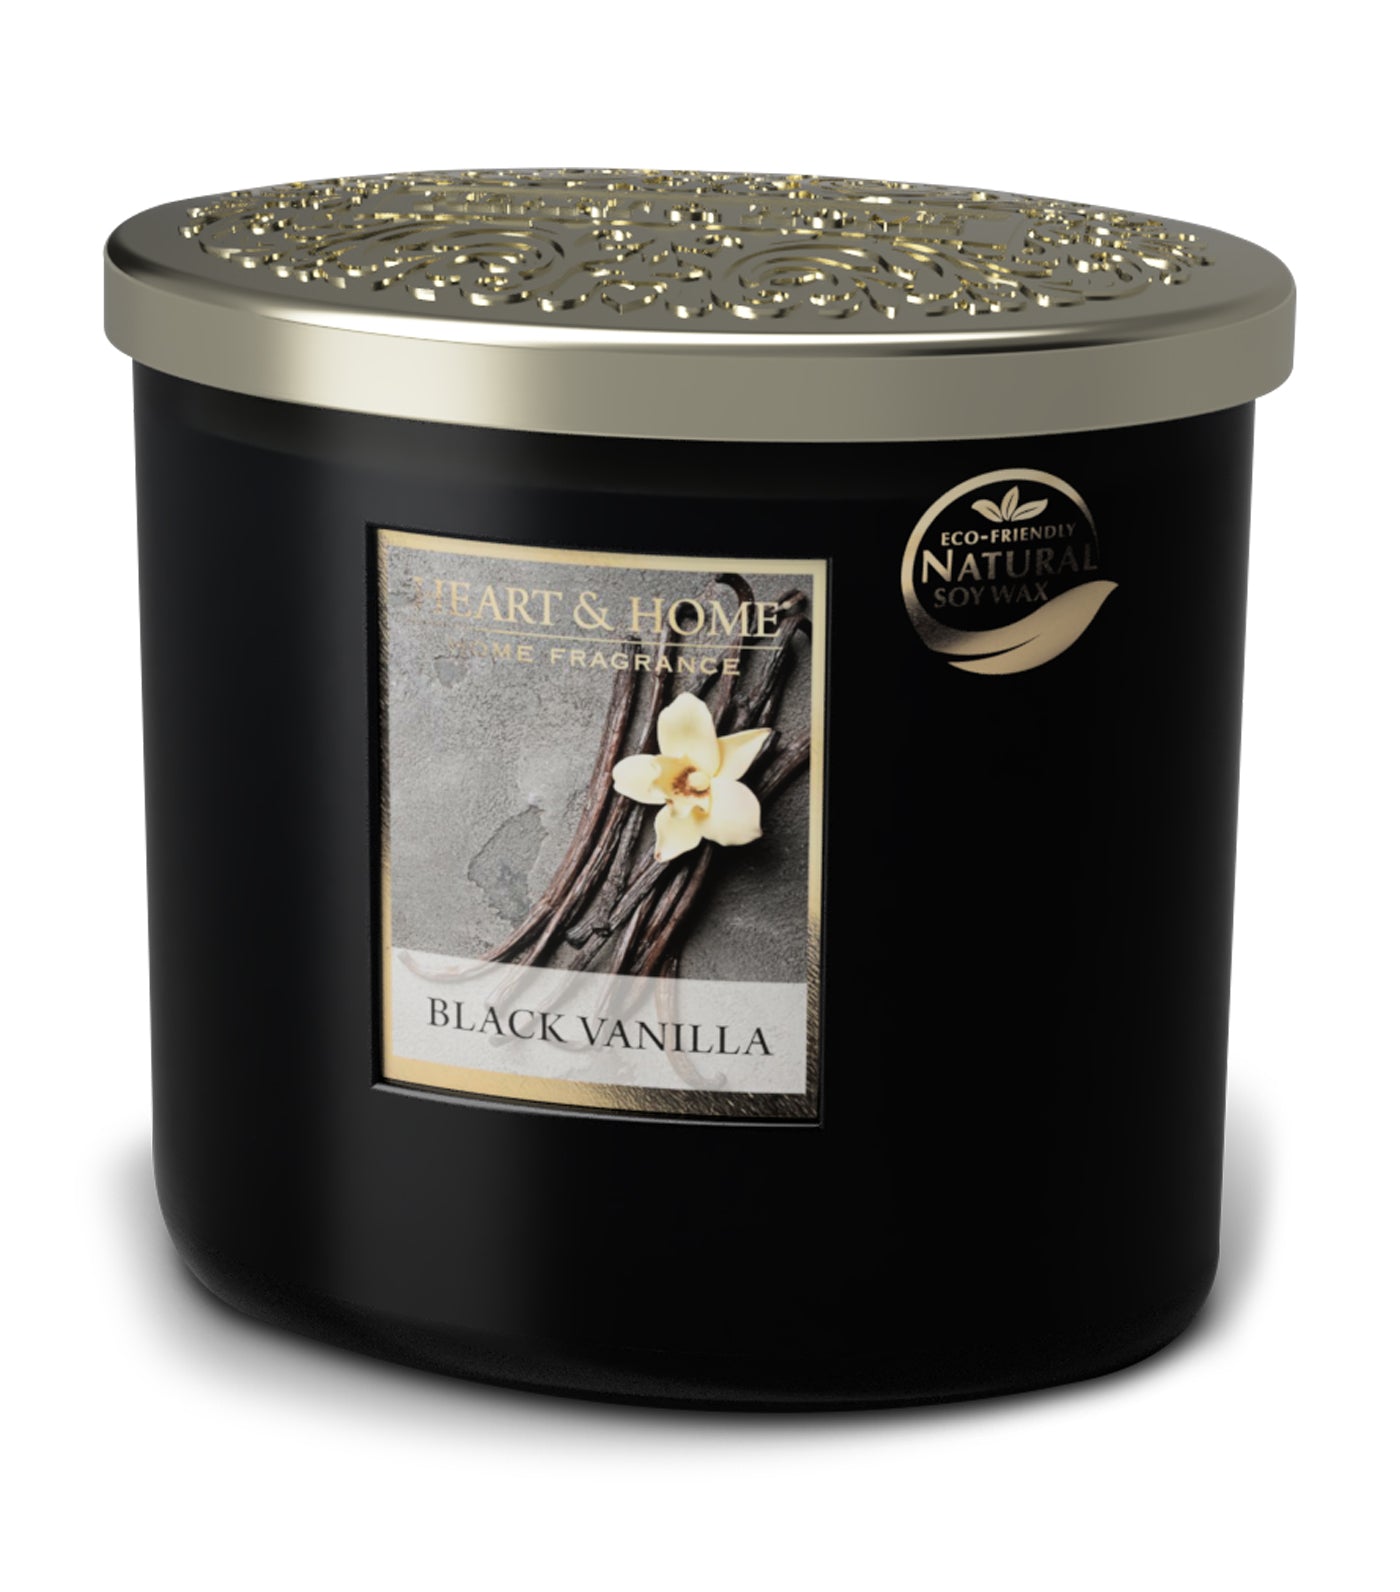 heart & home black vanilla - twin wick soy candle